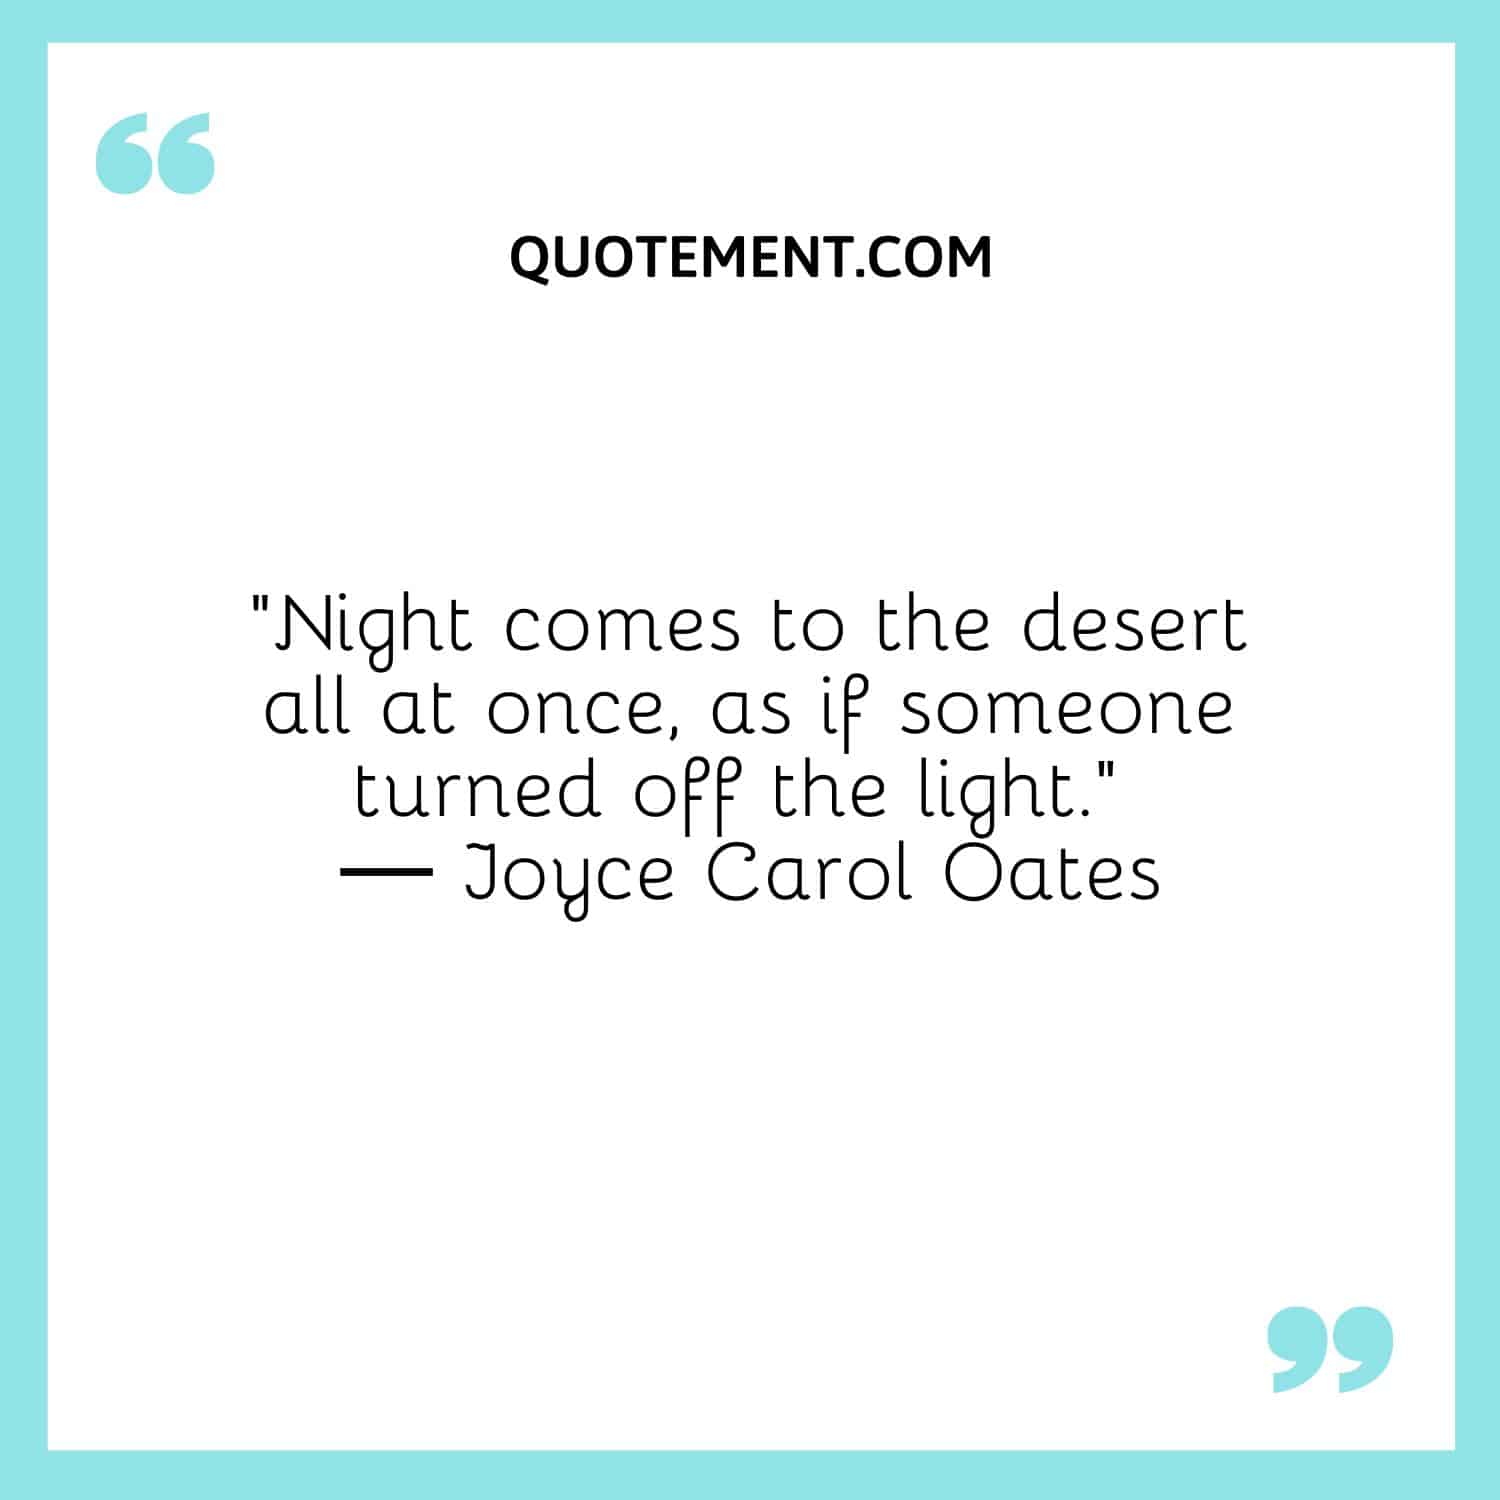 Night comes to the desert all at once, as if someone turned off the light